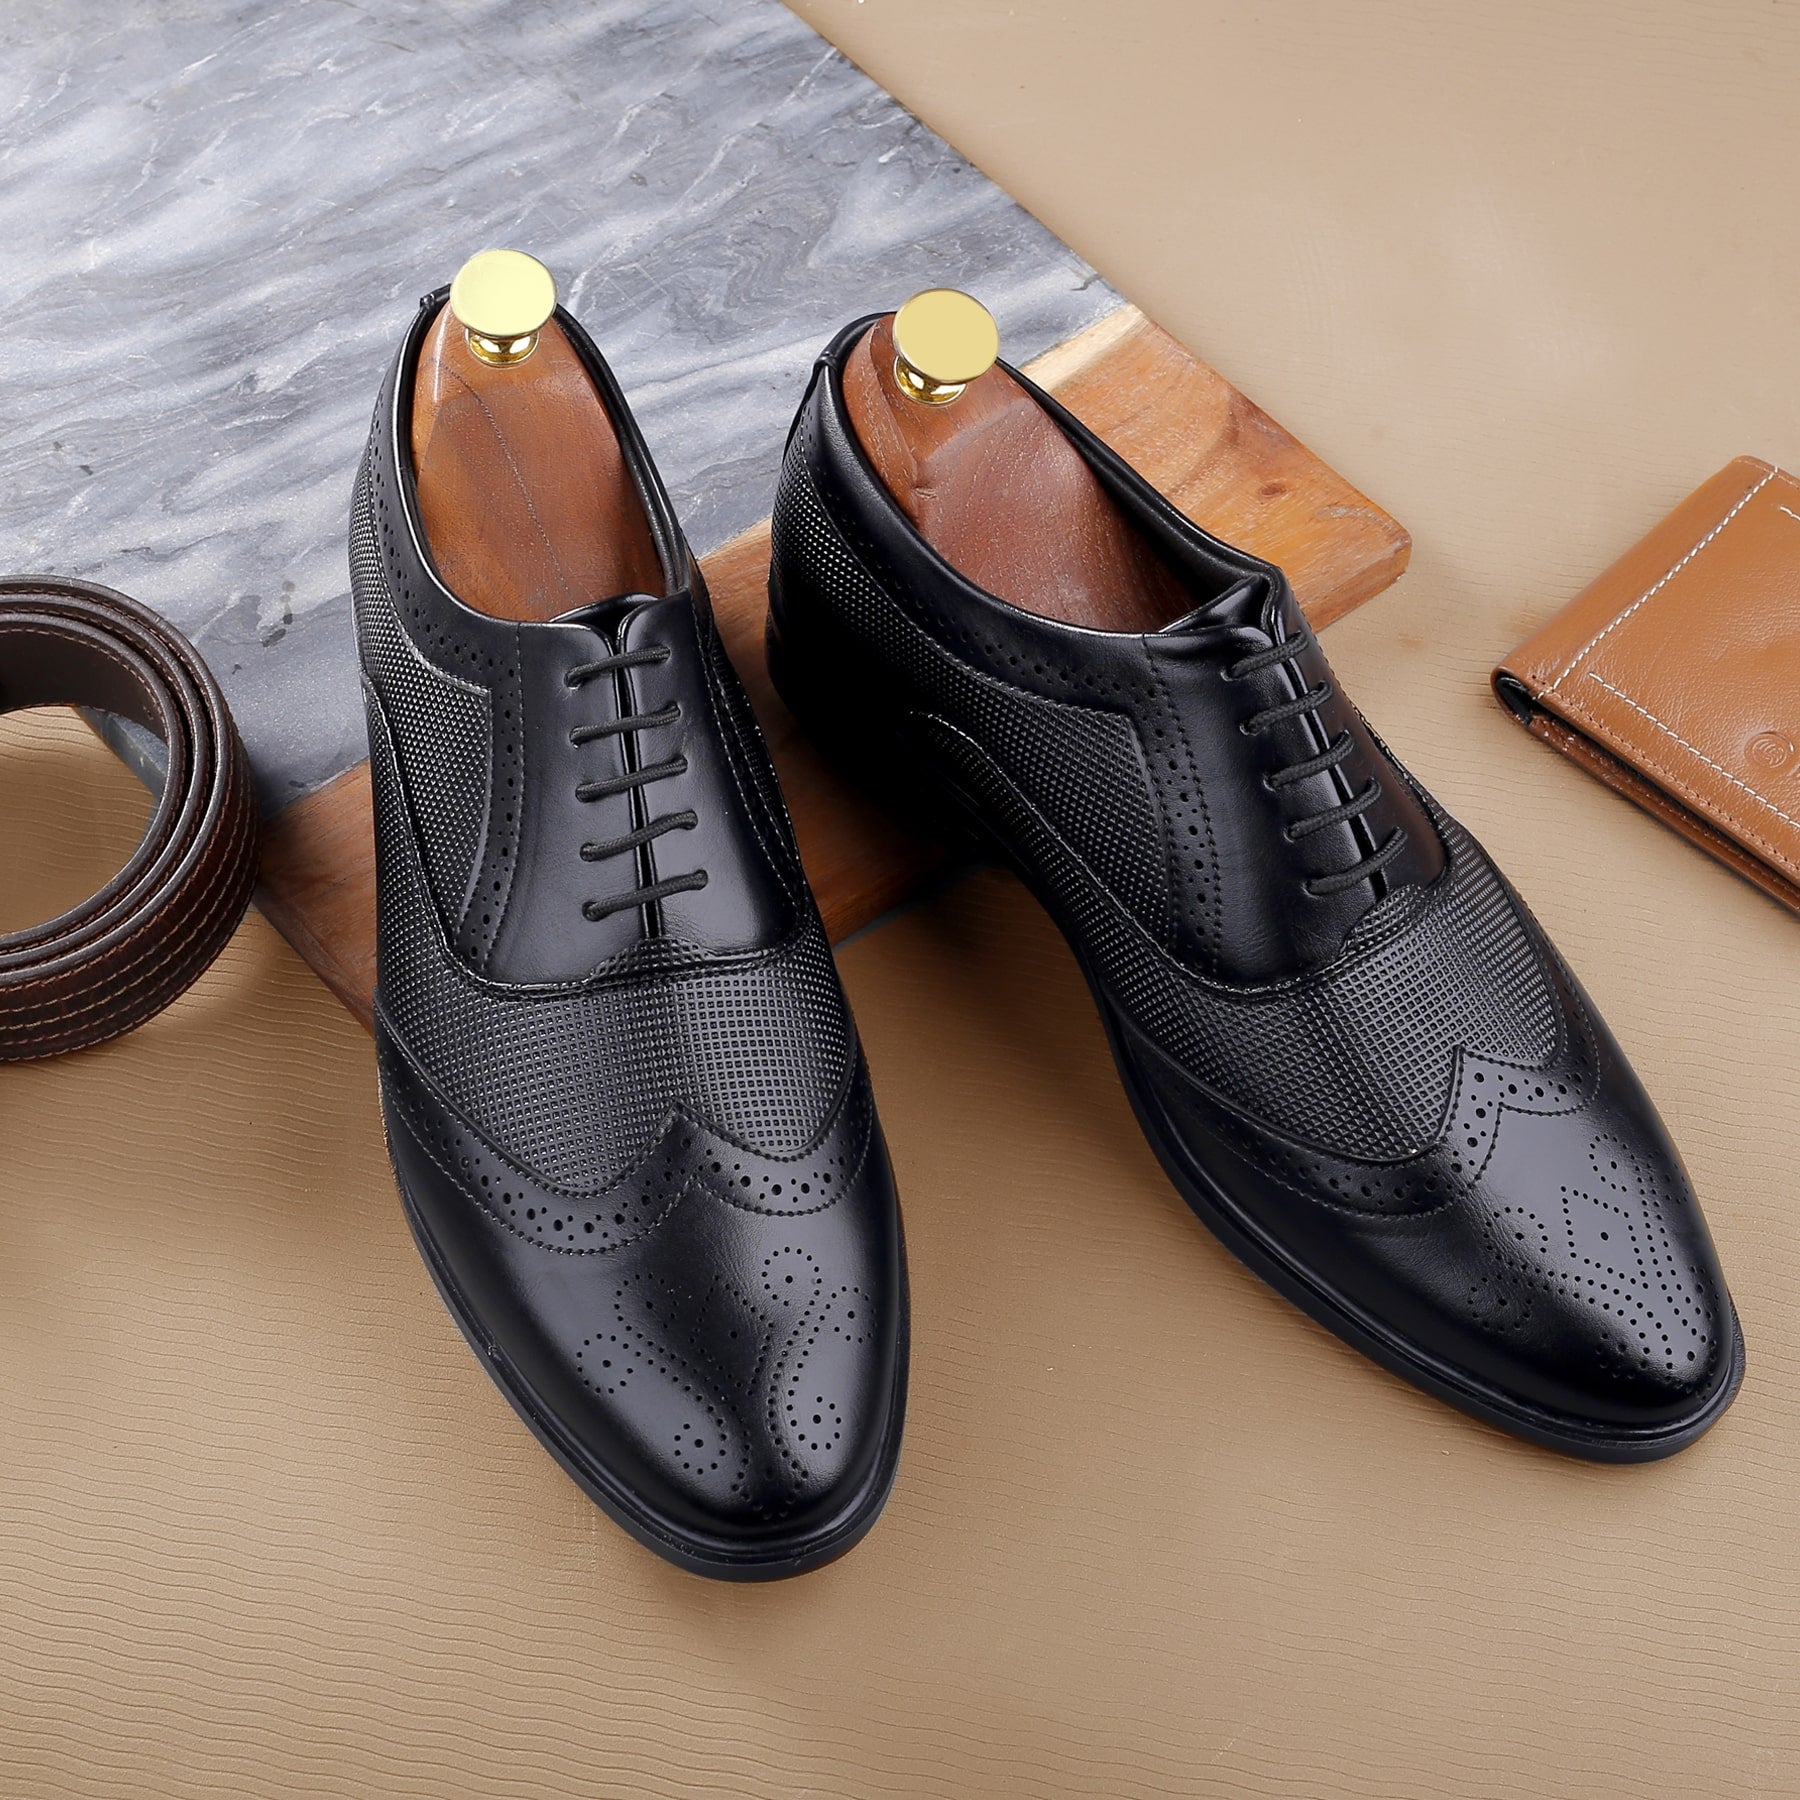 Bacca Bucci VICTORIA Formal Shoes with Superior Comfort | All Day Wear